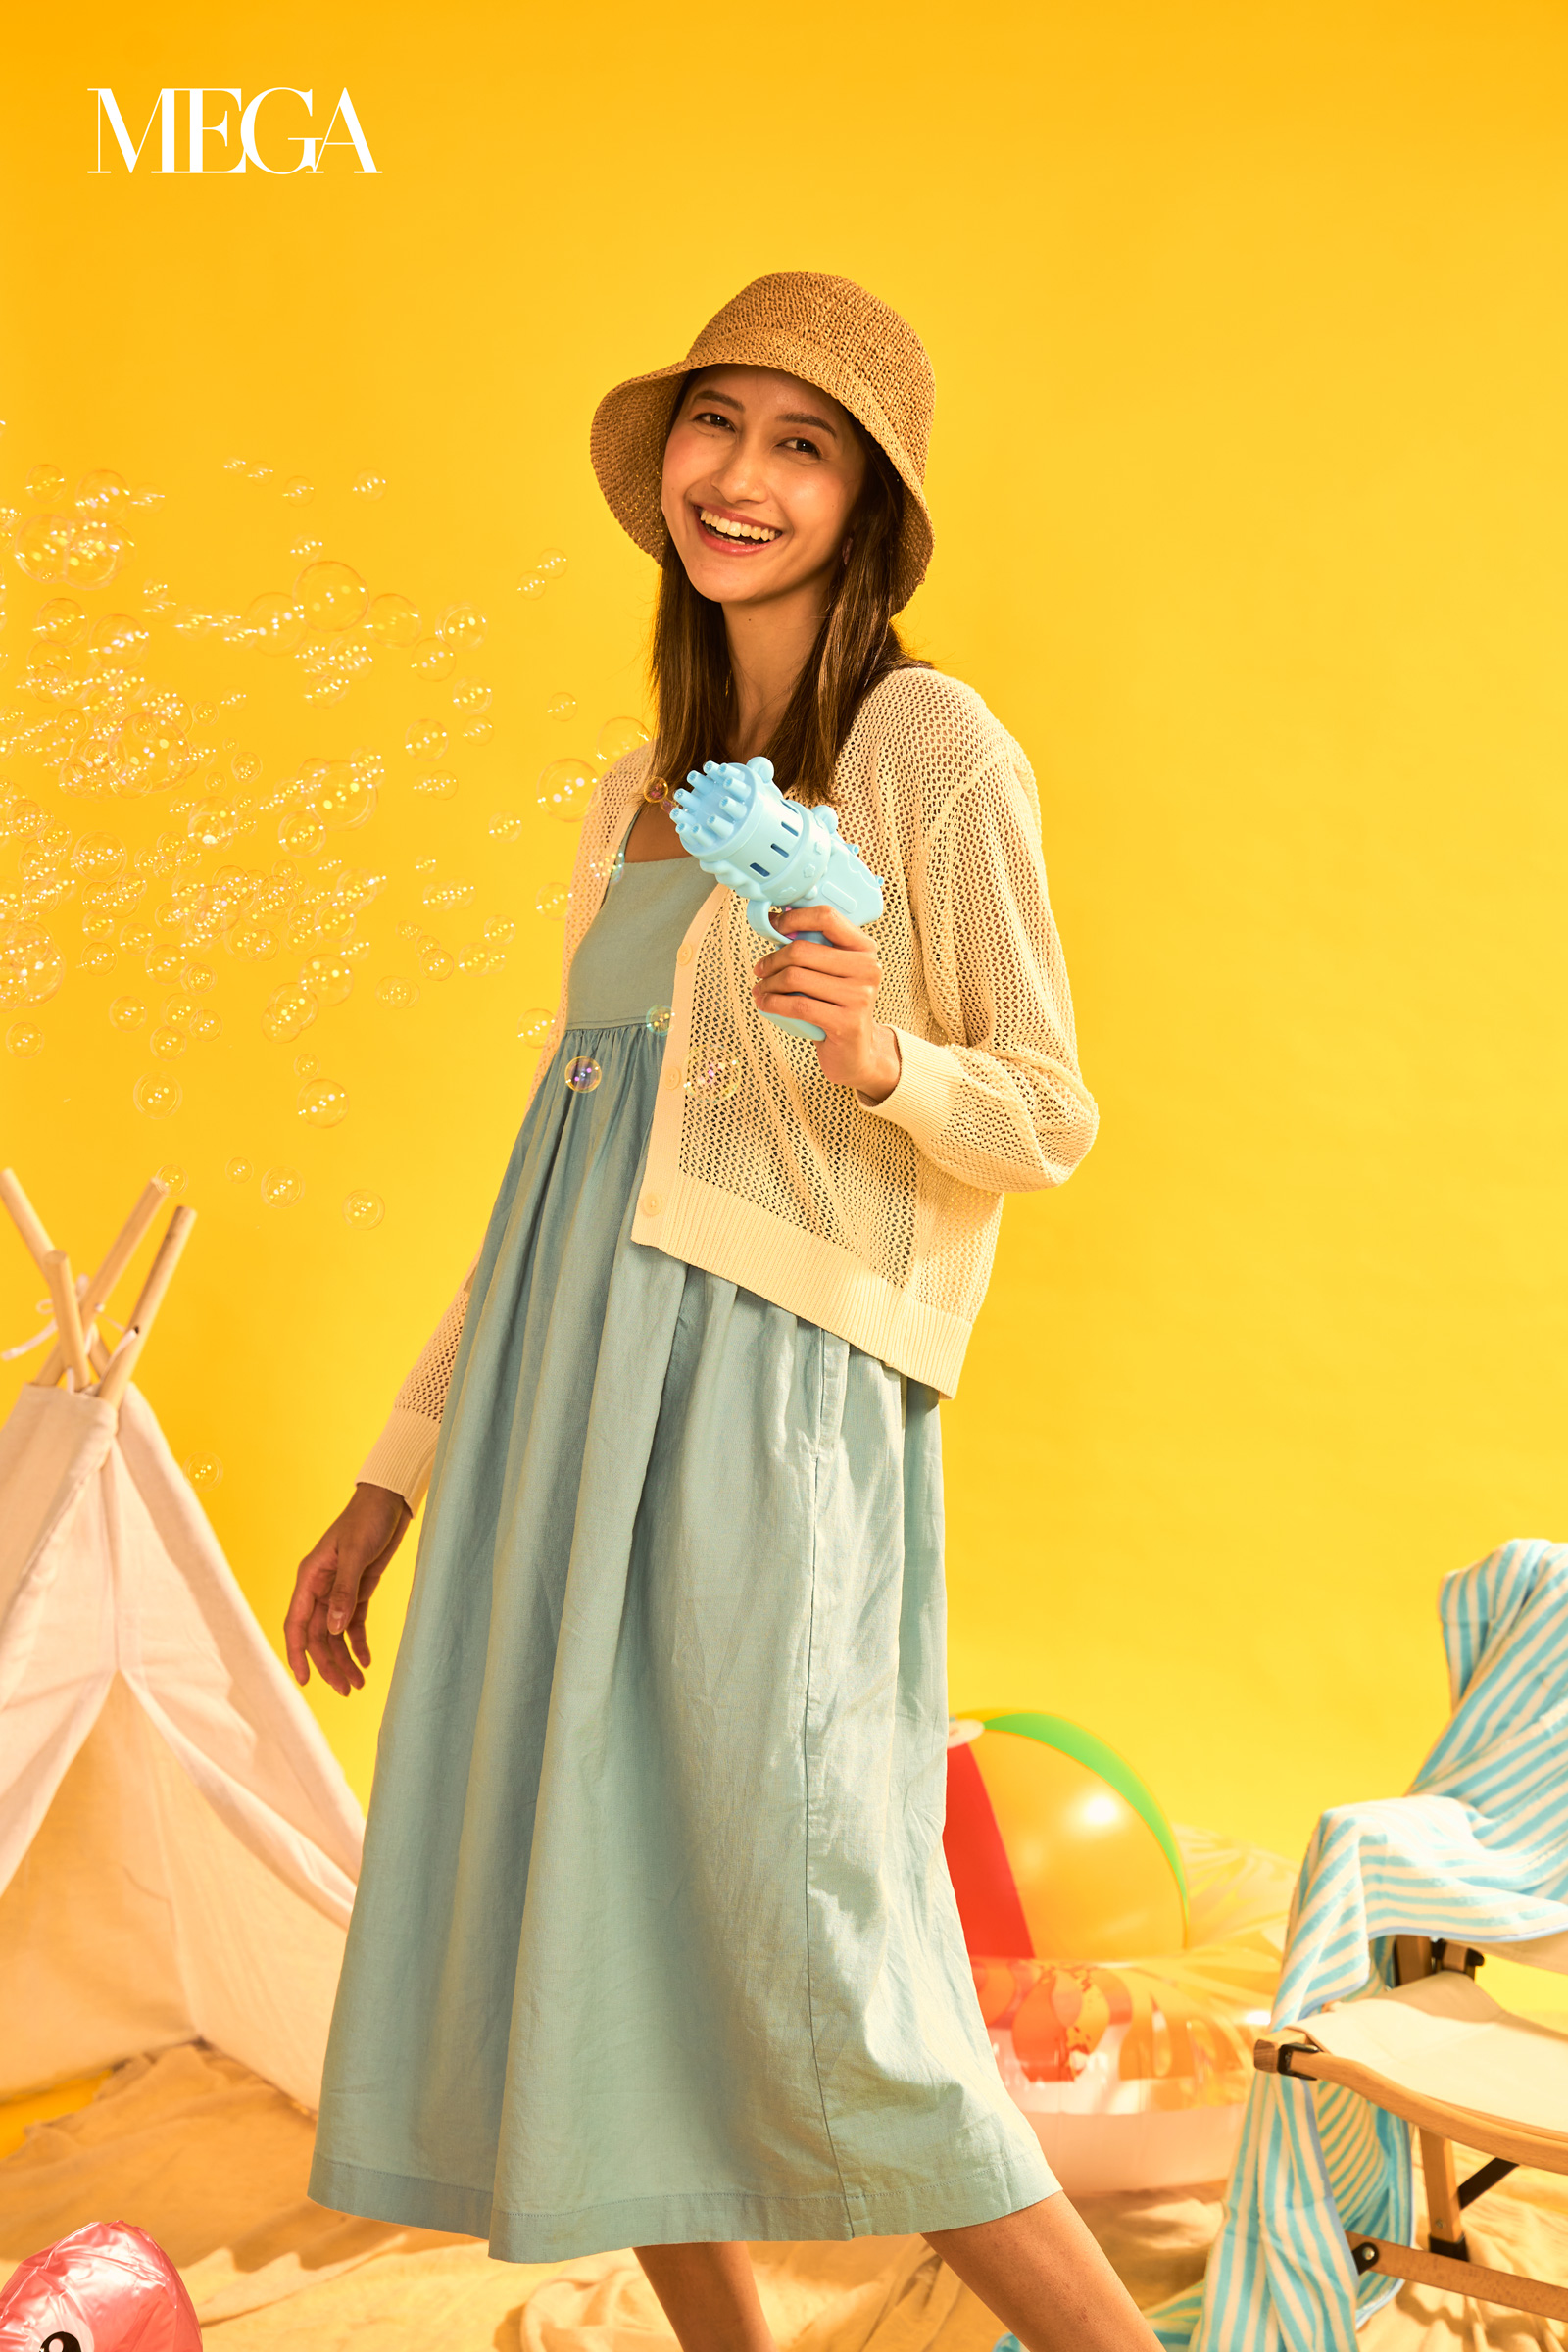 UNIQLO on X: Pack up a picnic + enjoy the summertime sun in